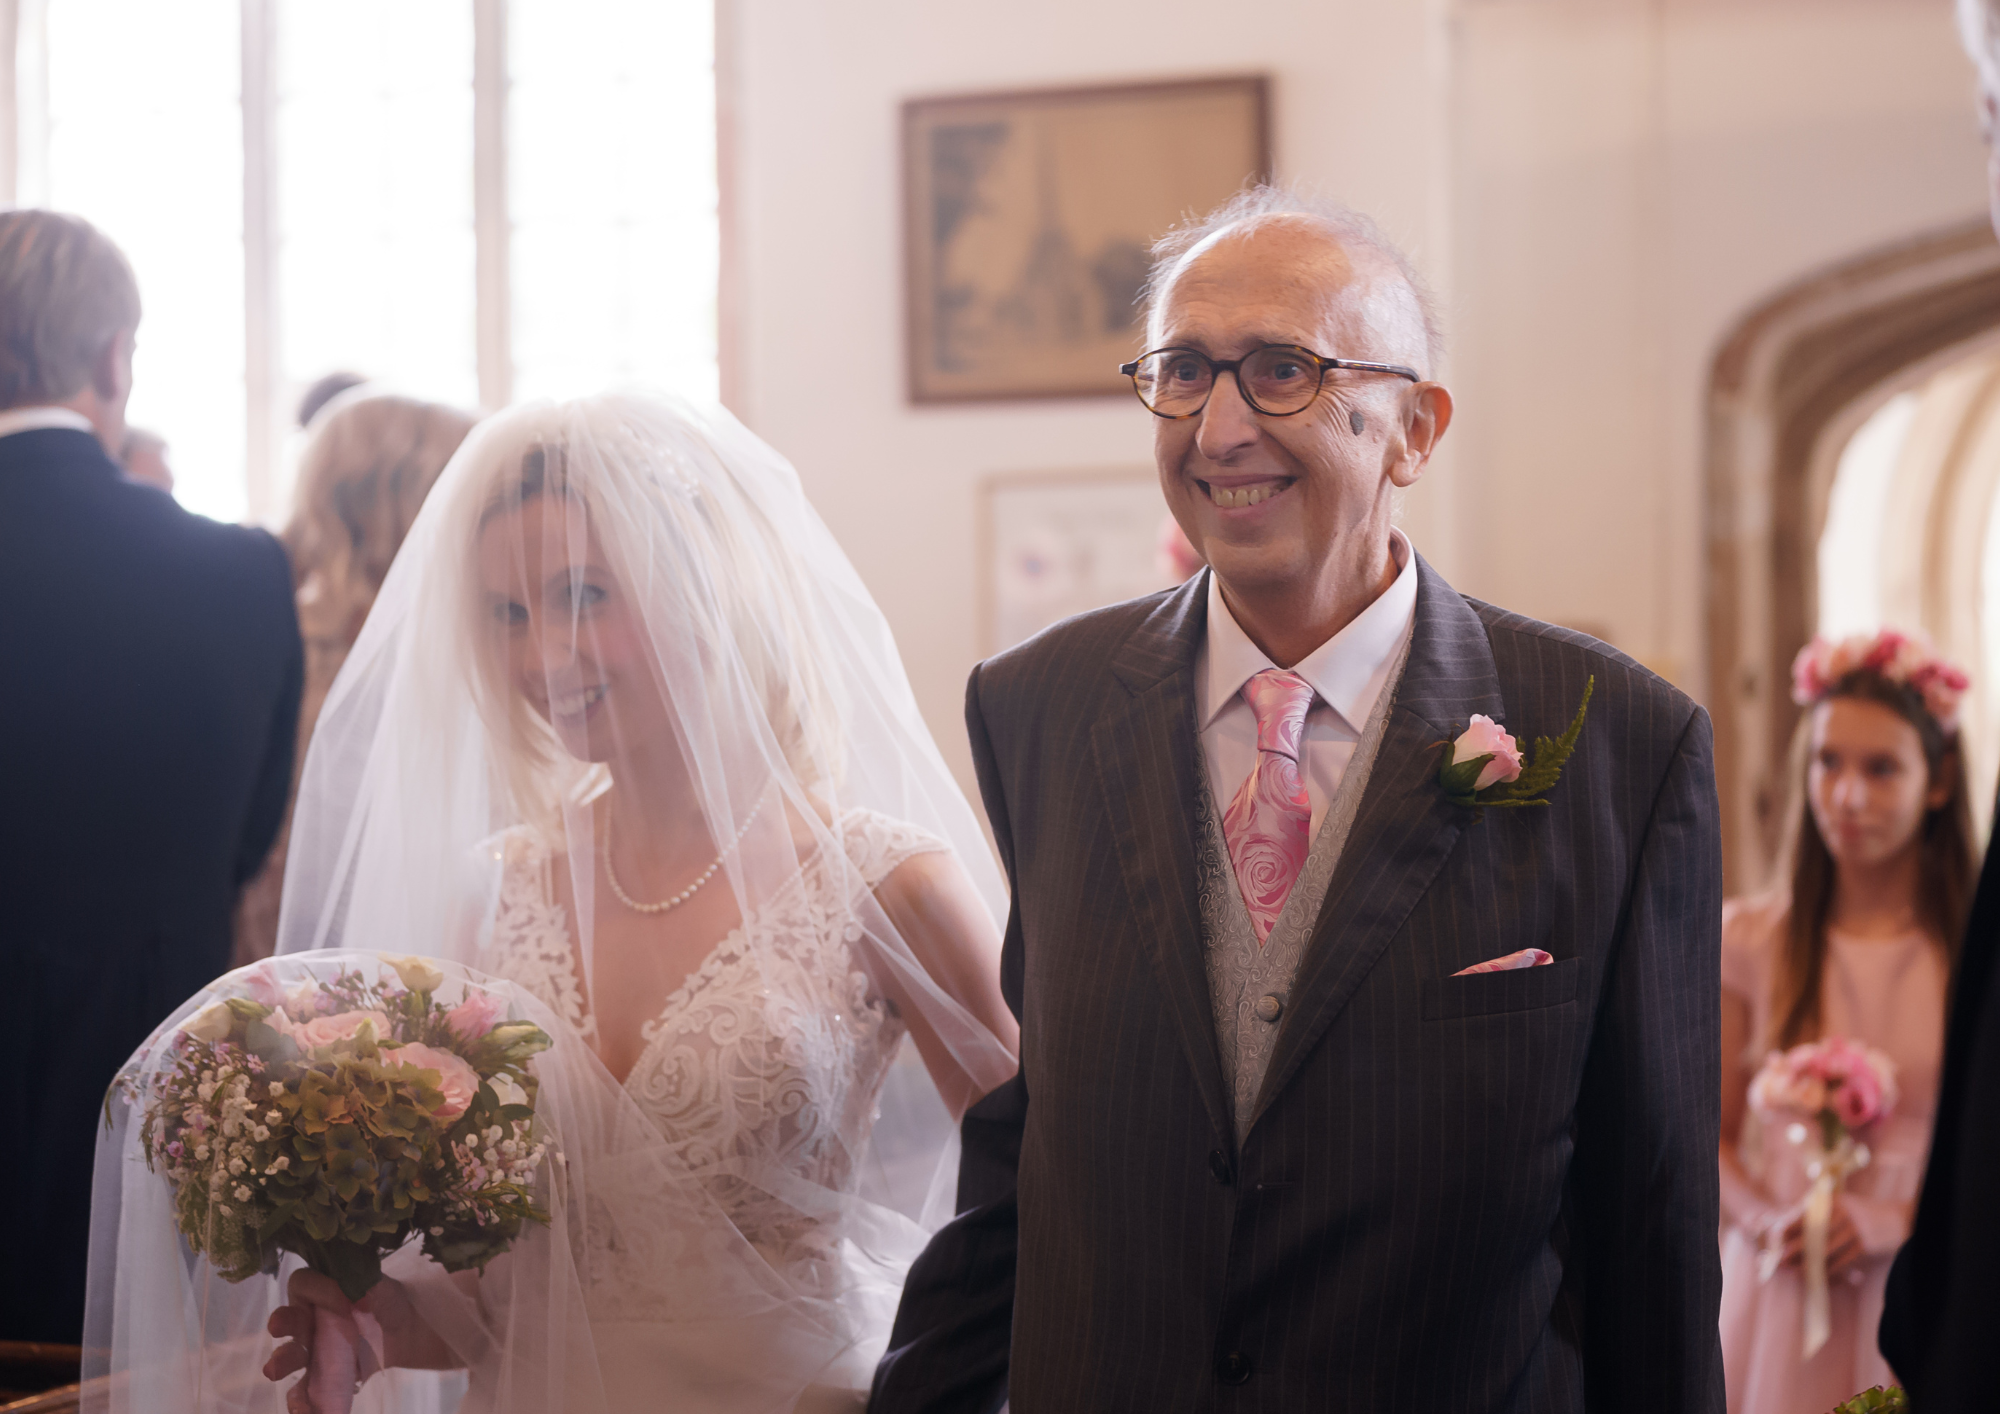 David walking Delia down the aisle - St Margaret's Hospice Stories Somerset